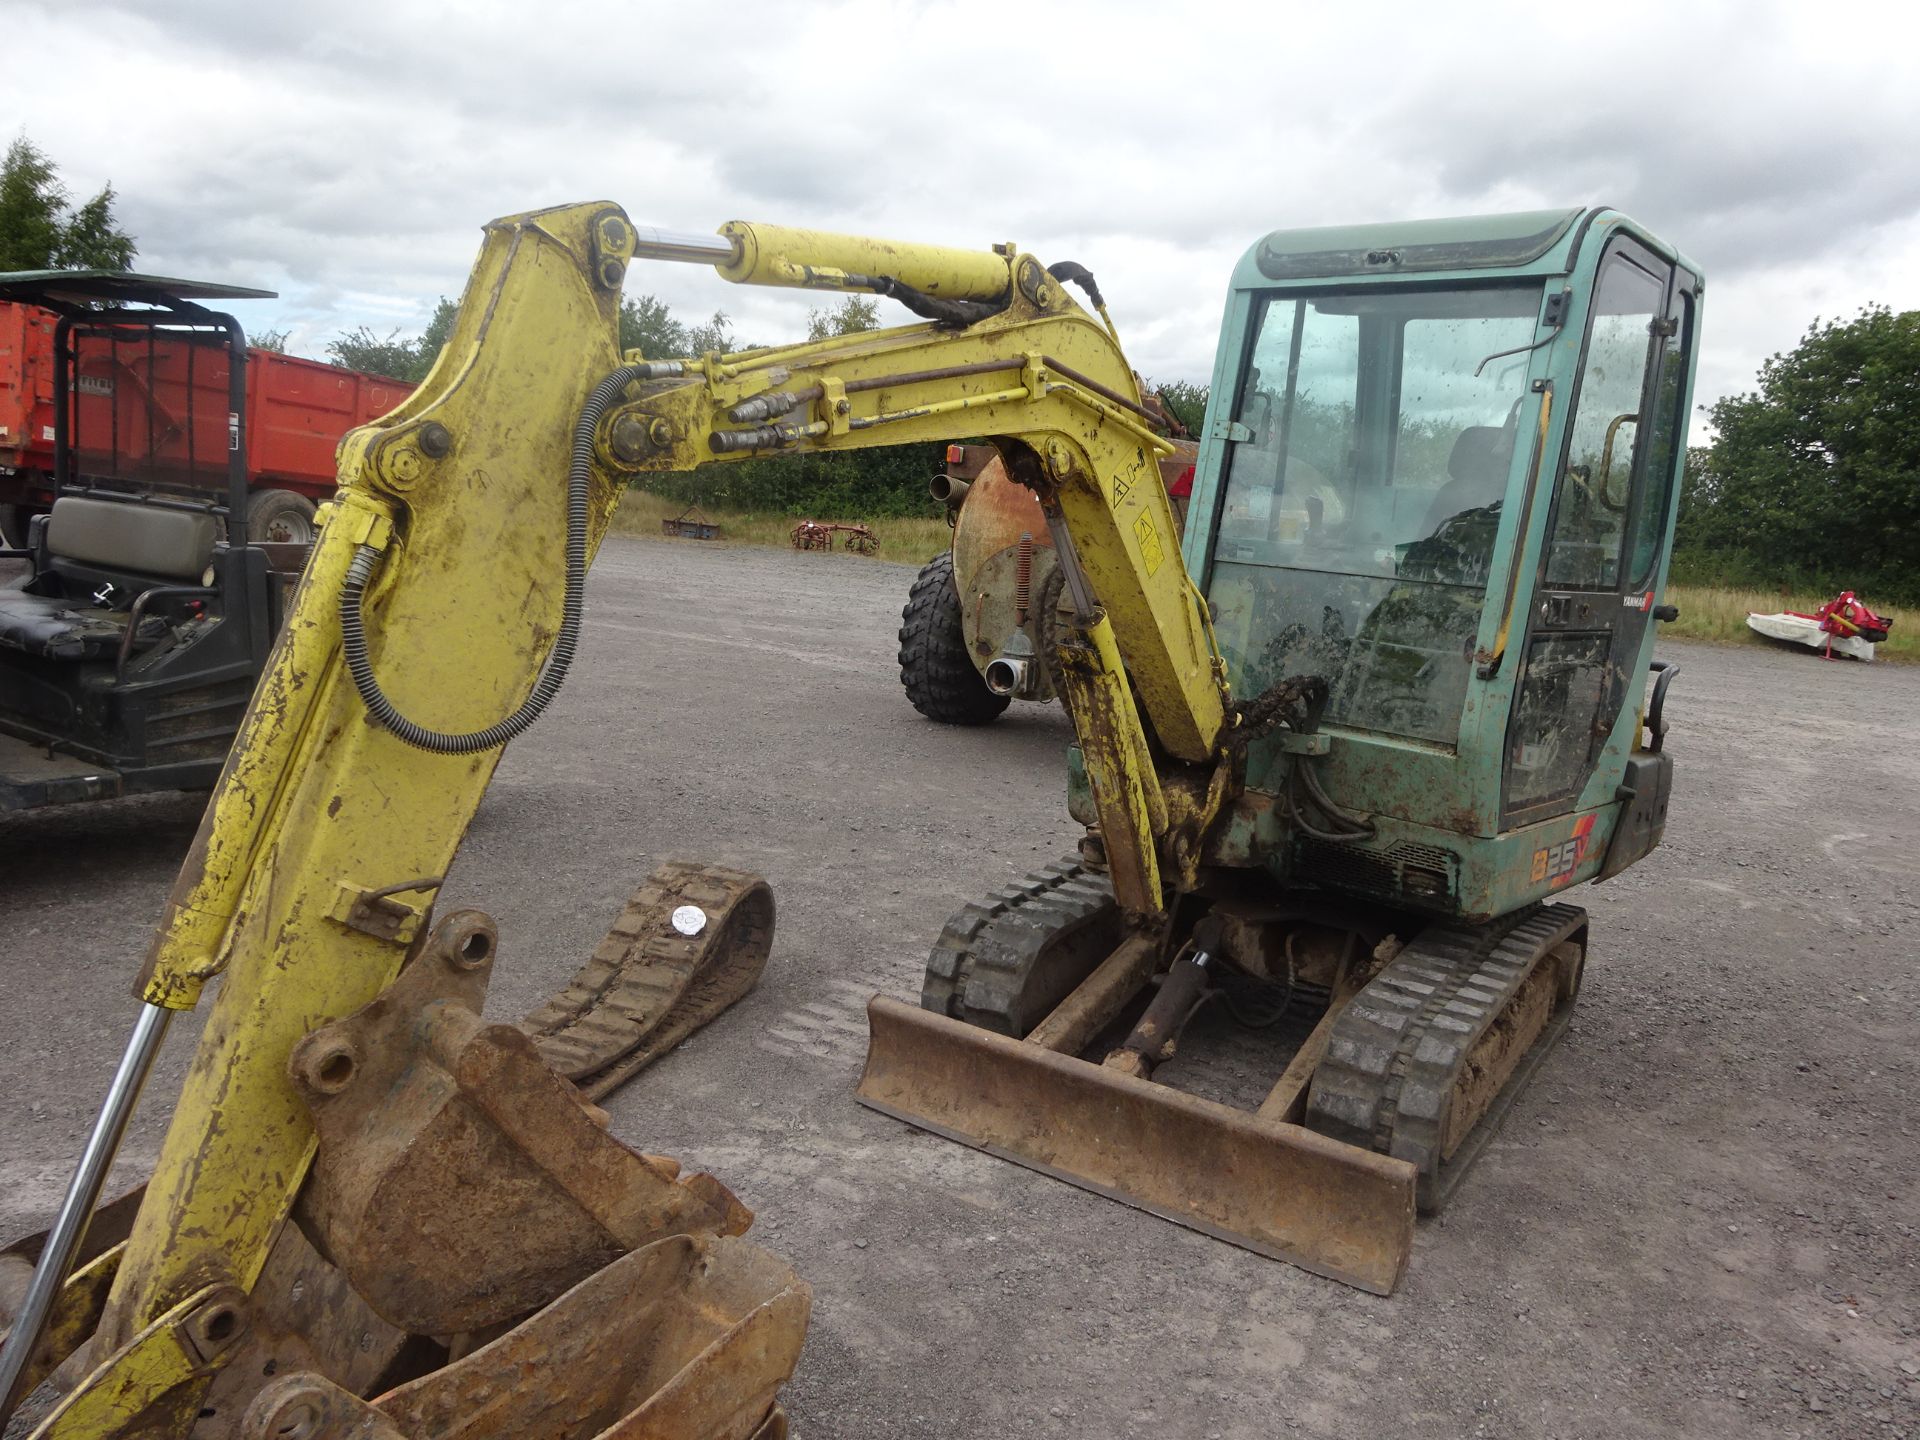 YANMAR 2.6T TRACKED DIGGER C/W 3 BUCKETS SPARE TRACK 4500 HOURS - Image 6 of 7